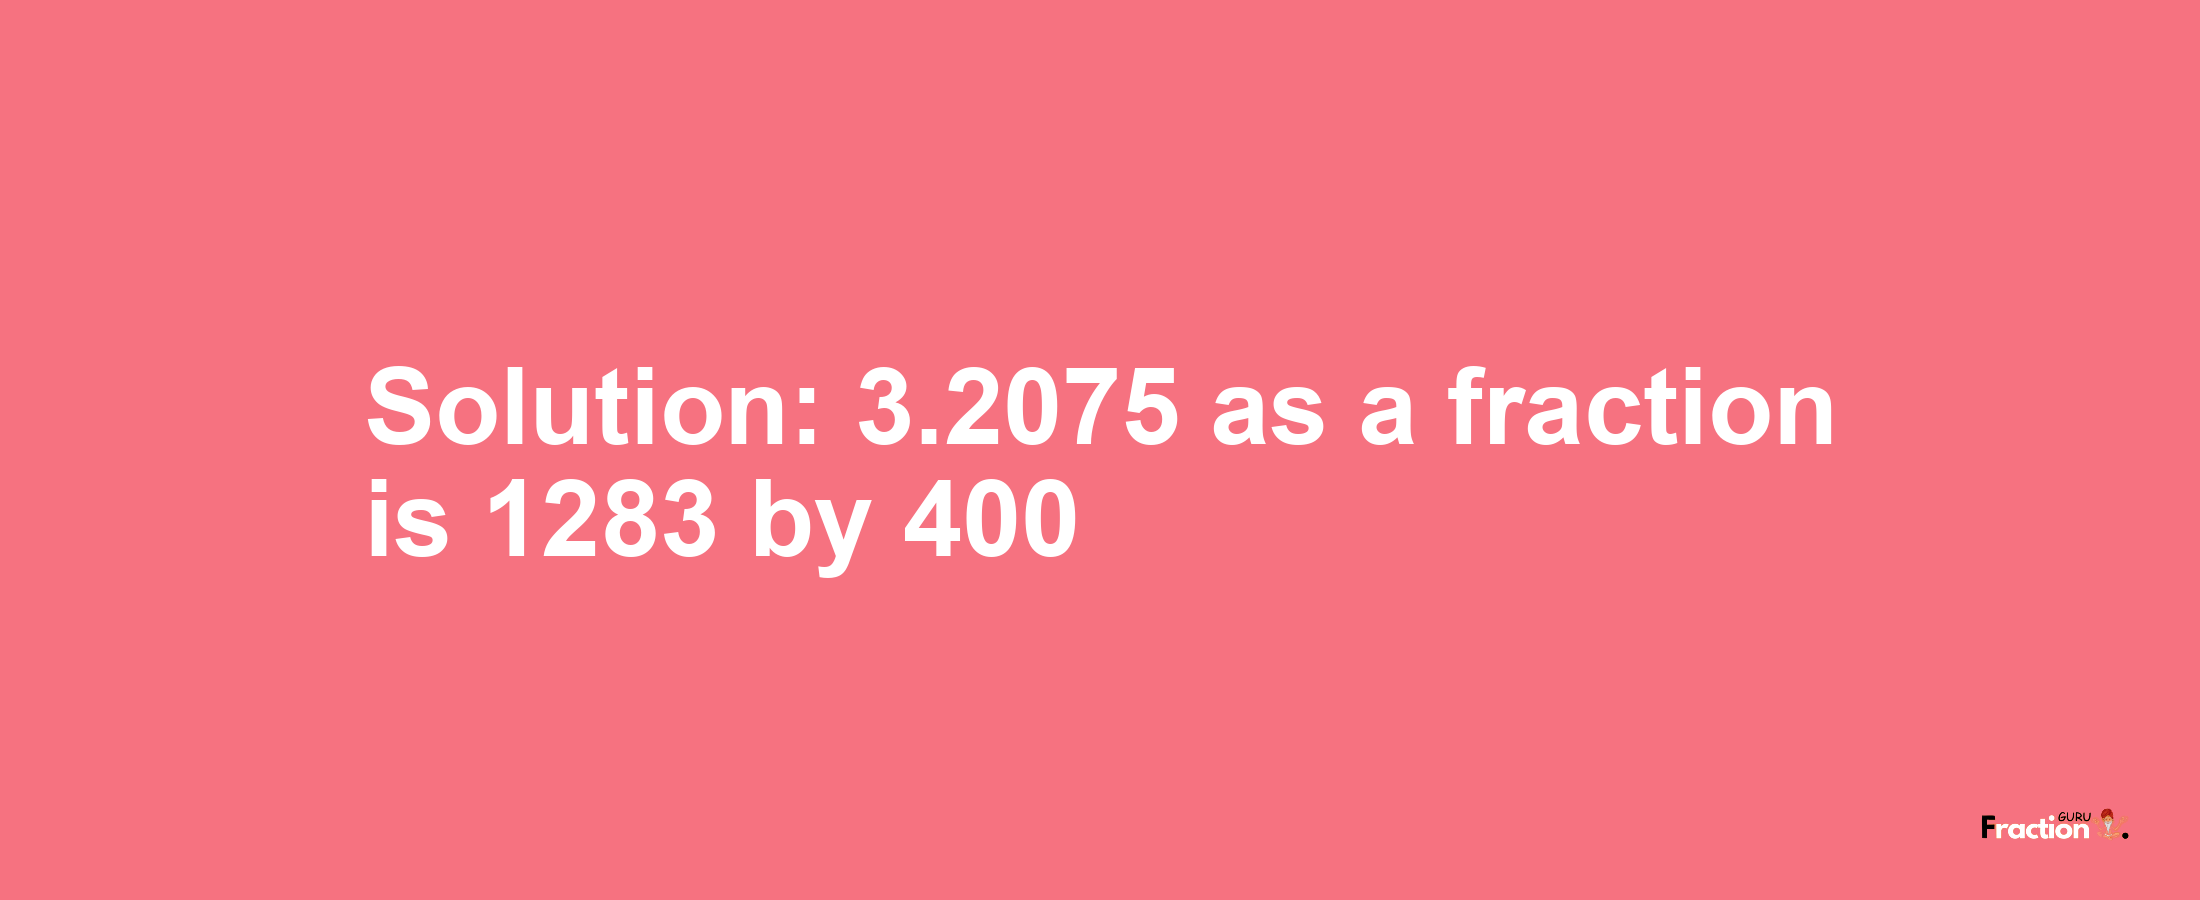 Solution:3.2075 as a fraction is 1283/400